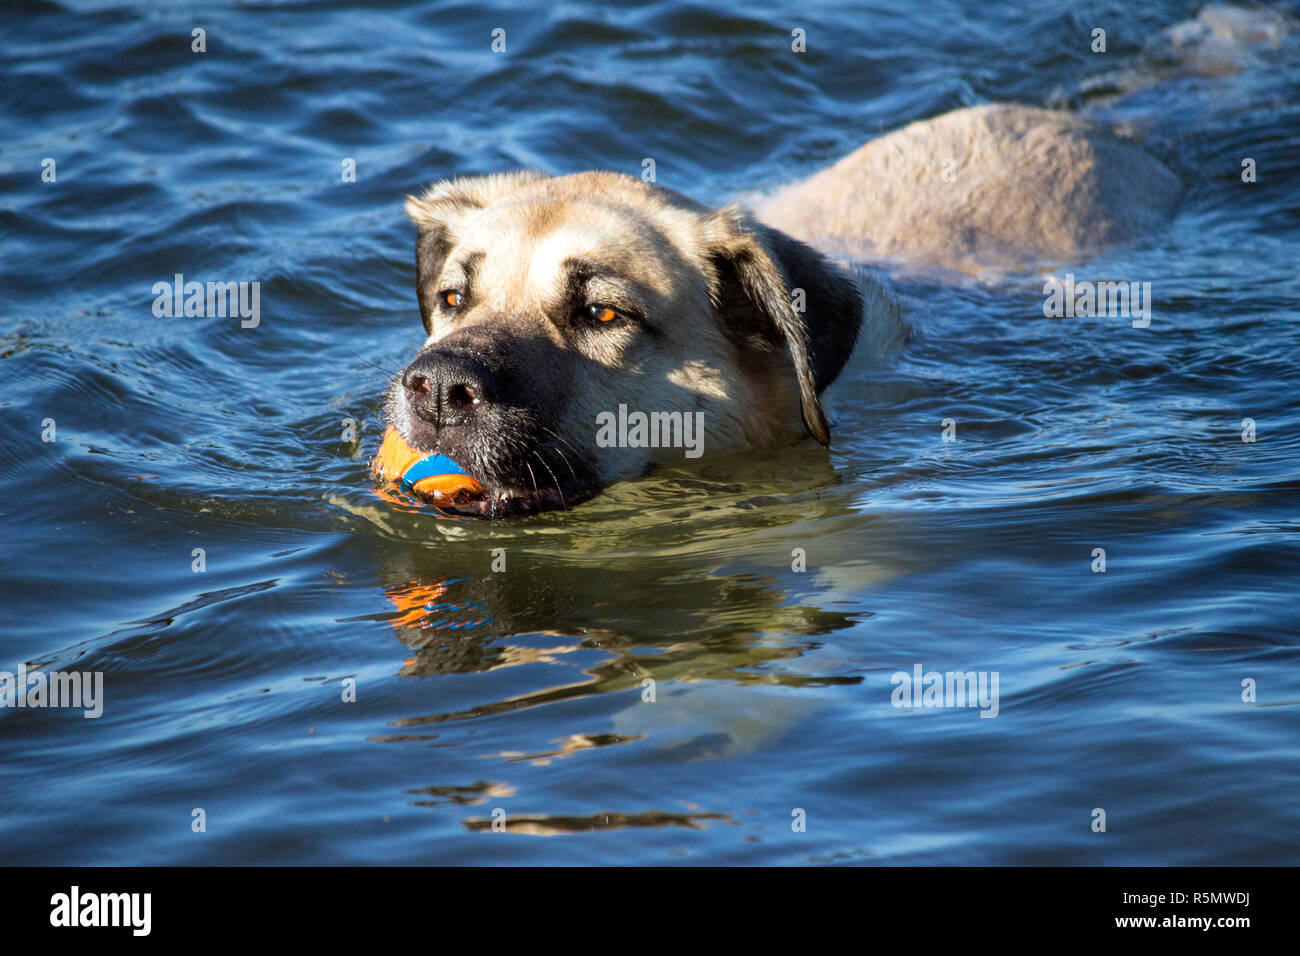 Dog swimming in the river carrying a ball Stock Photo